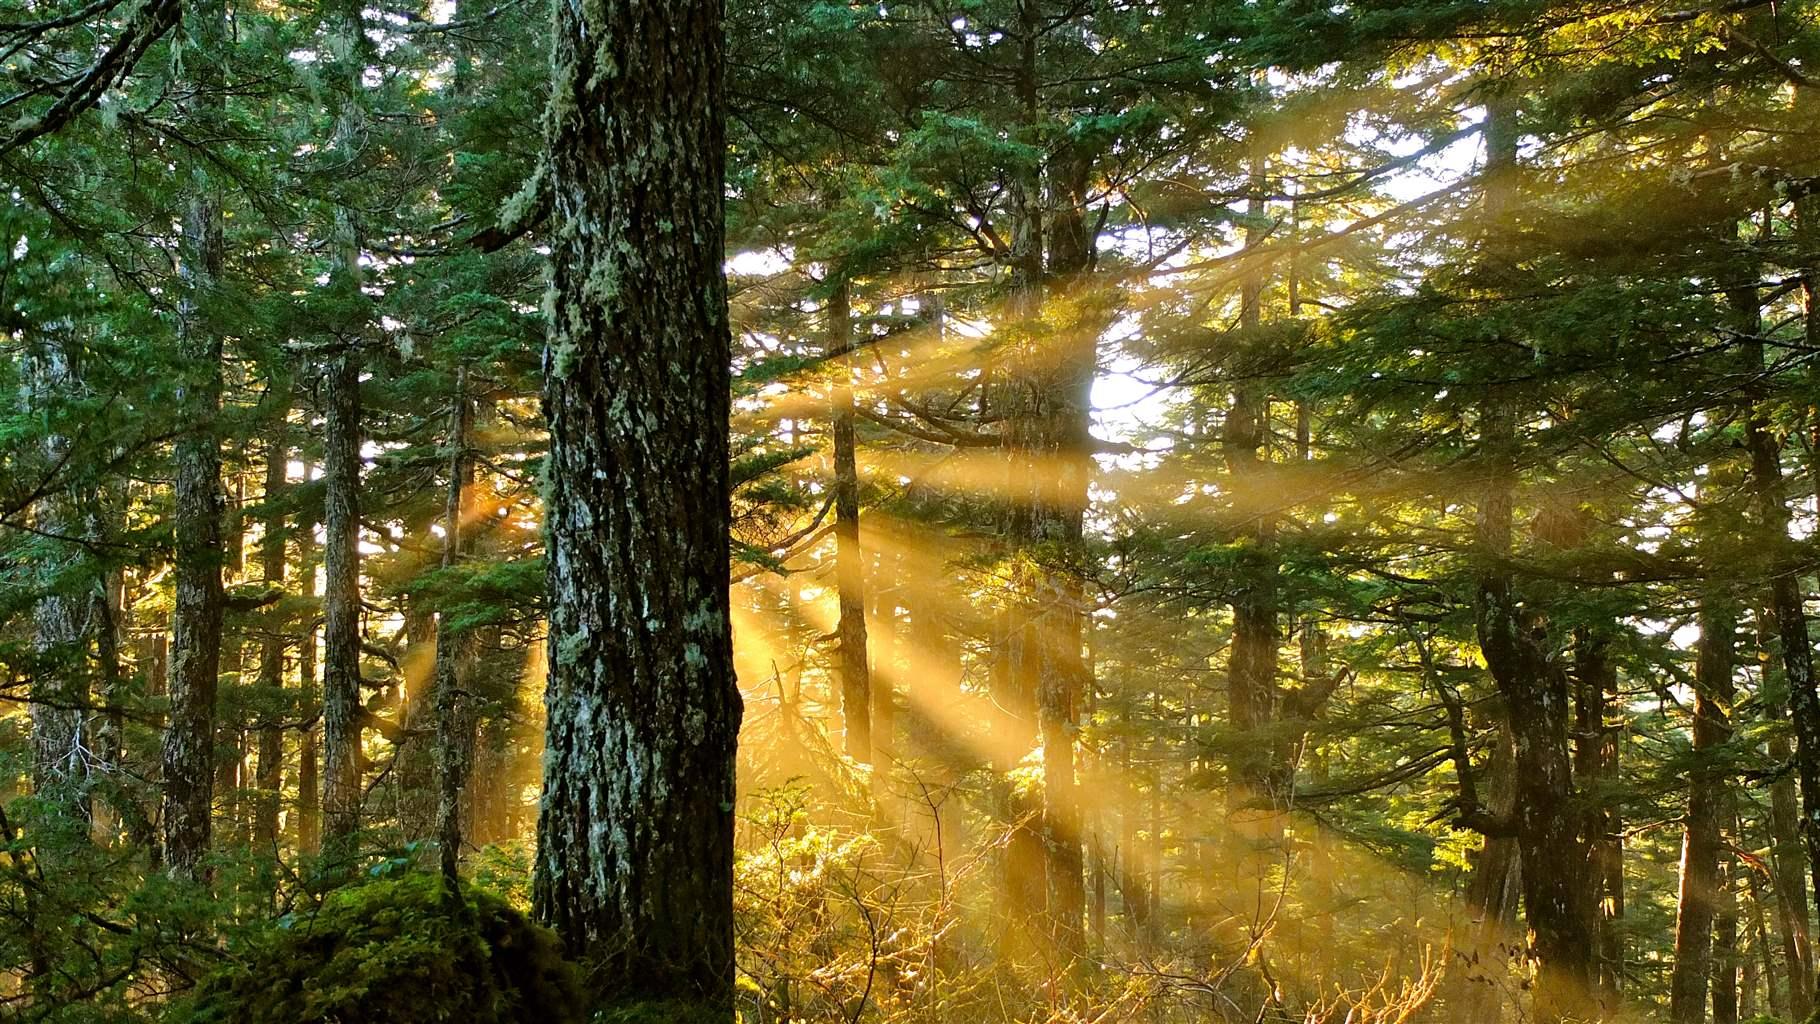 The sun shines through the green leaves, moss, and other plant life of an old-growth forest in Alaska's Tongass National Forest.